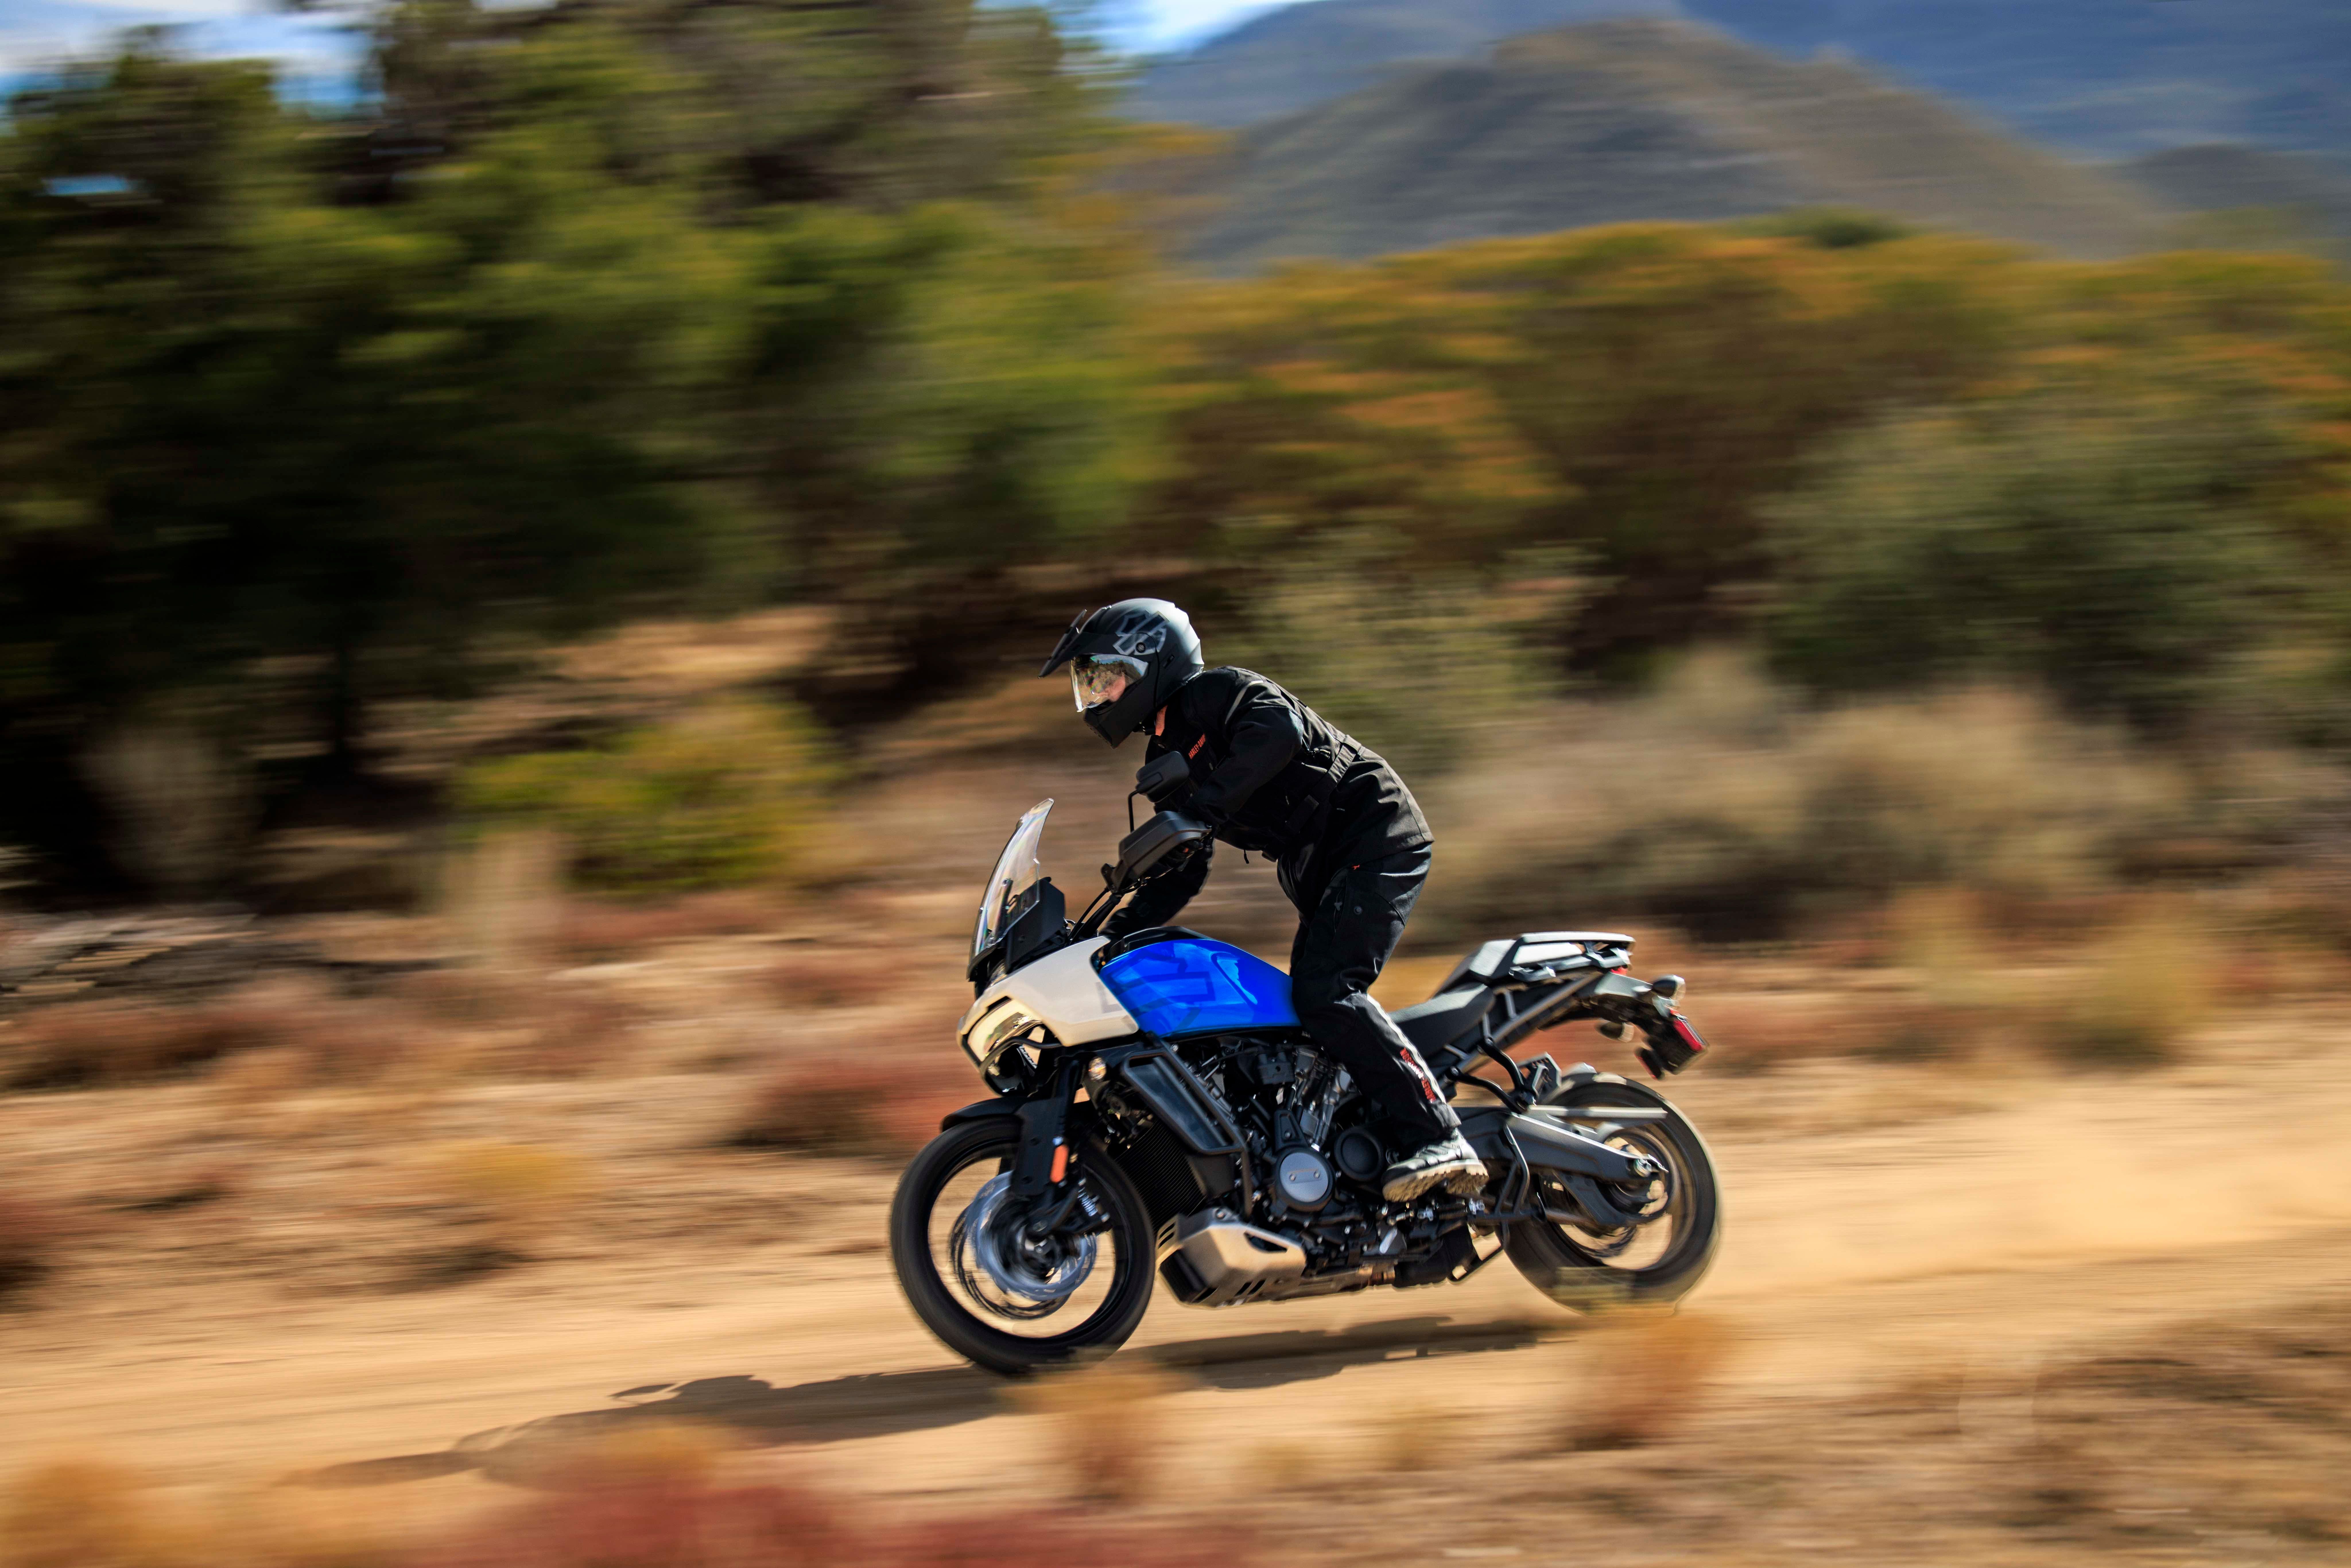 10 Reasons Why The Harley-Davidson Pan America 1250 Is The Best Adventure Touring Motorcycle